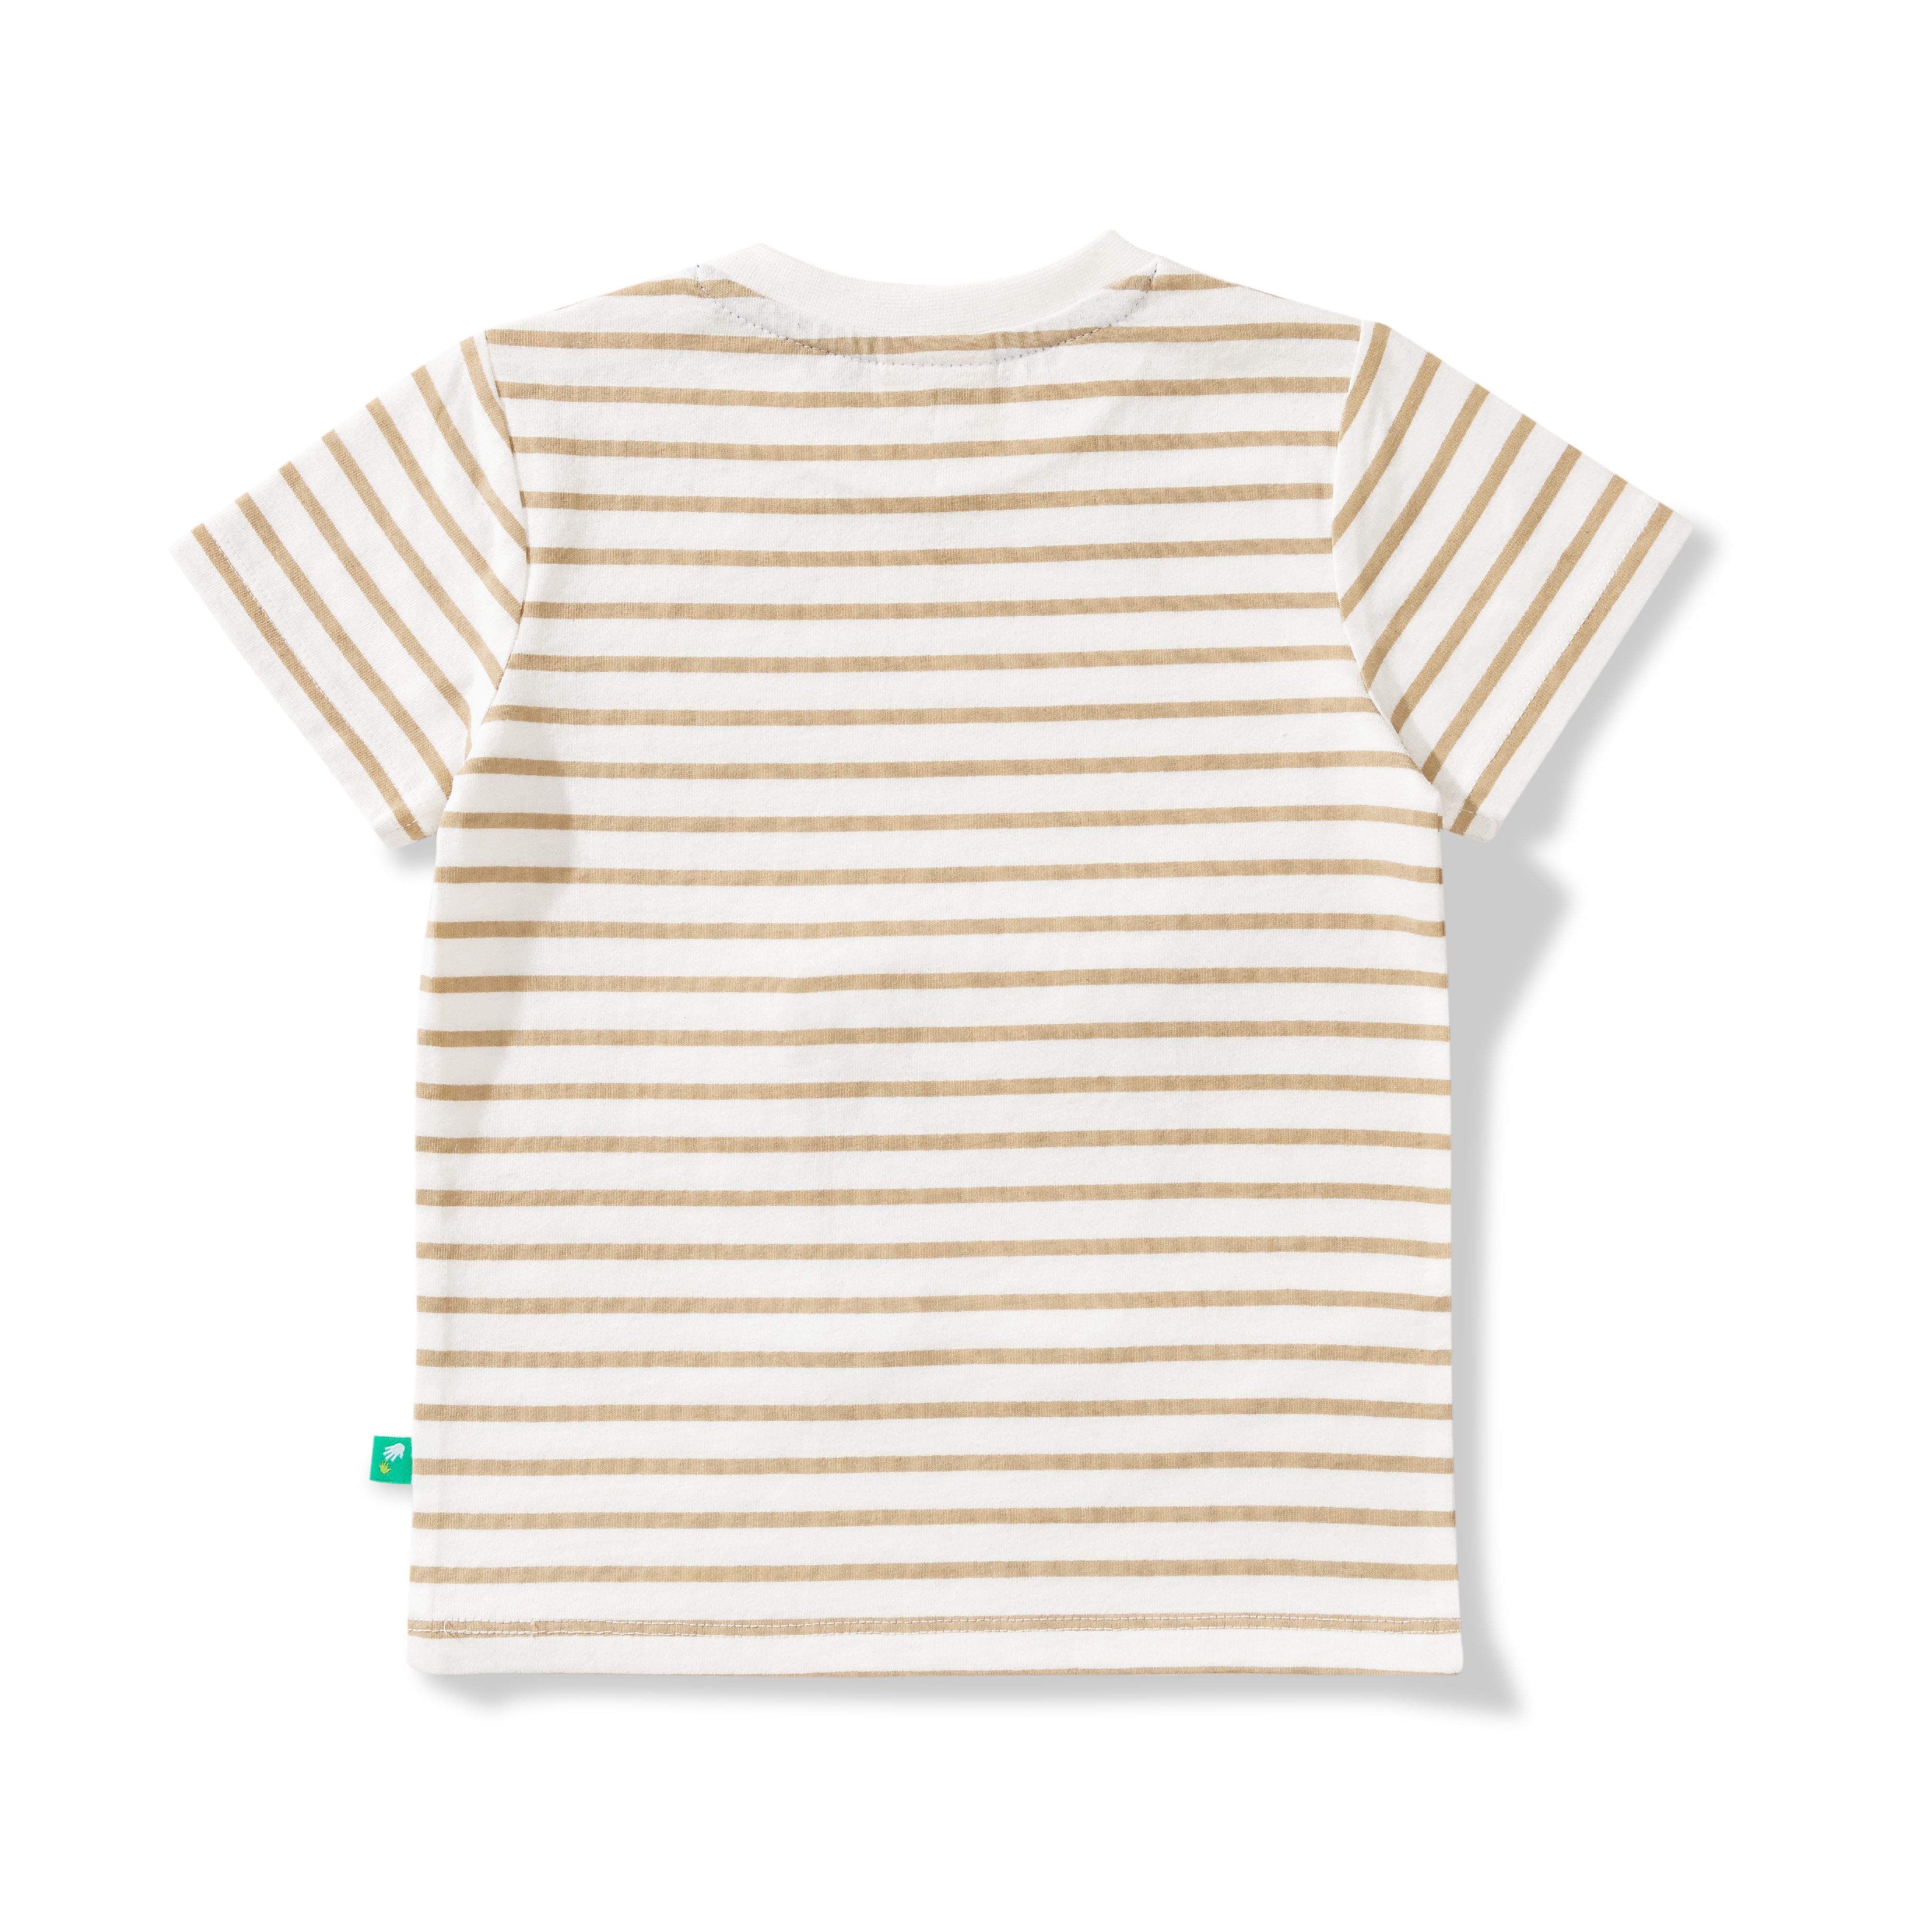 Baby Boys Striped & Graphic Printed T Shirt & Solid Pant Set